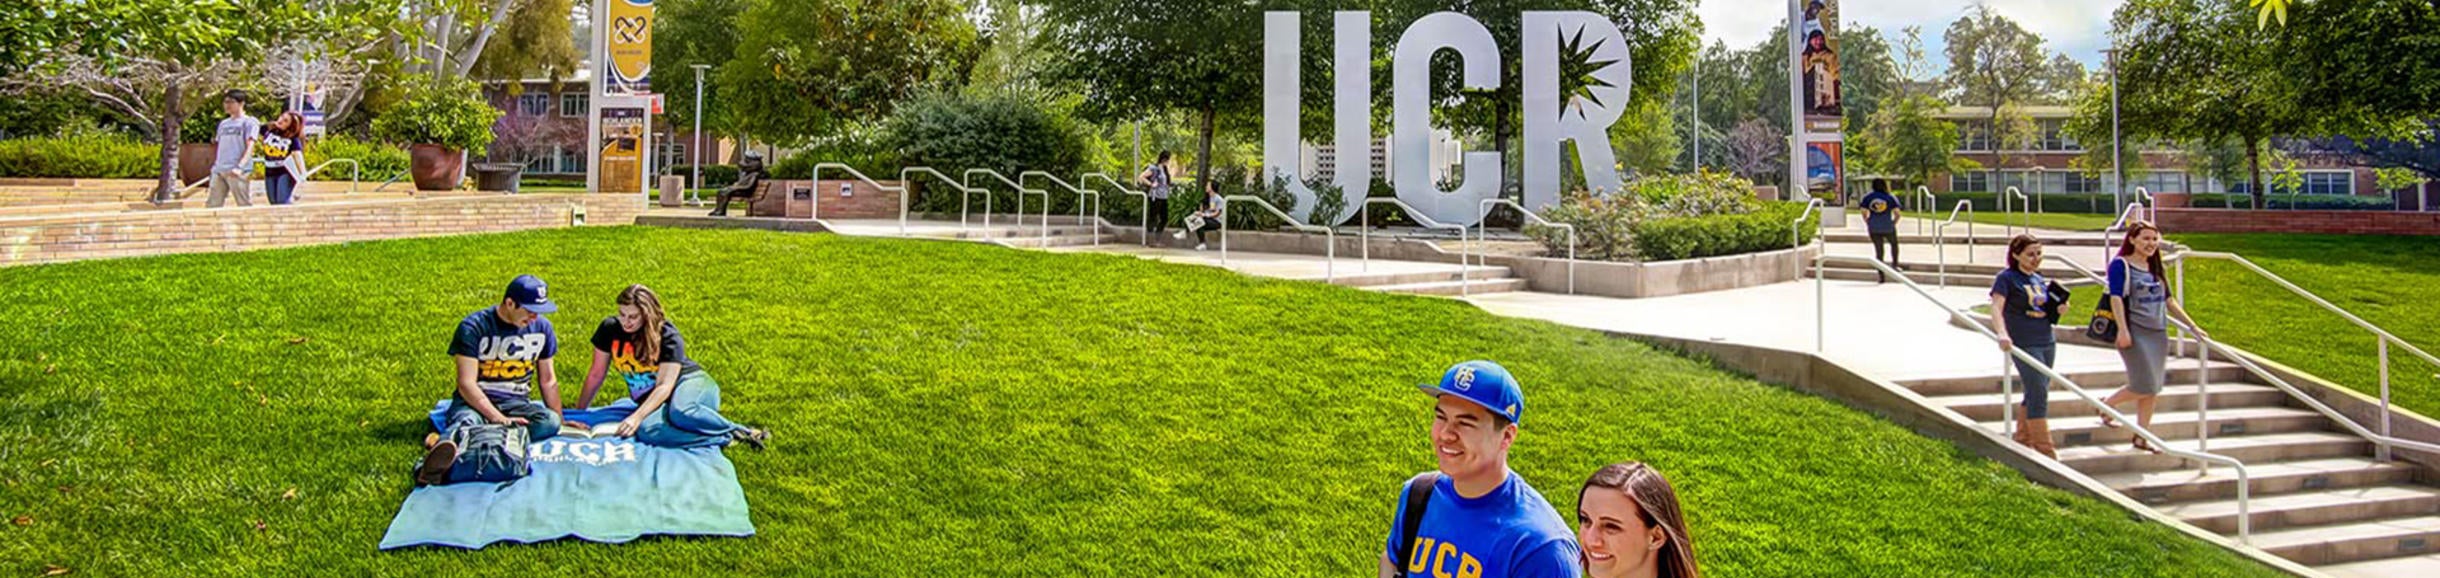 UCR sign and lawn (c) UCR